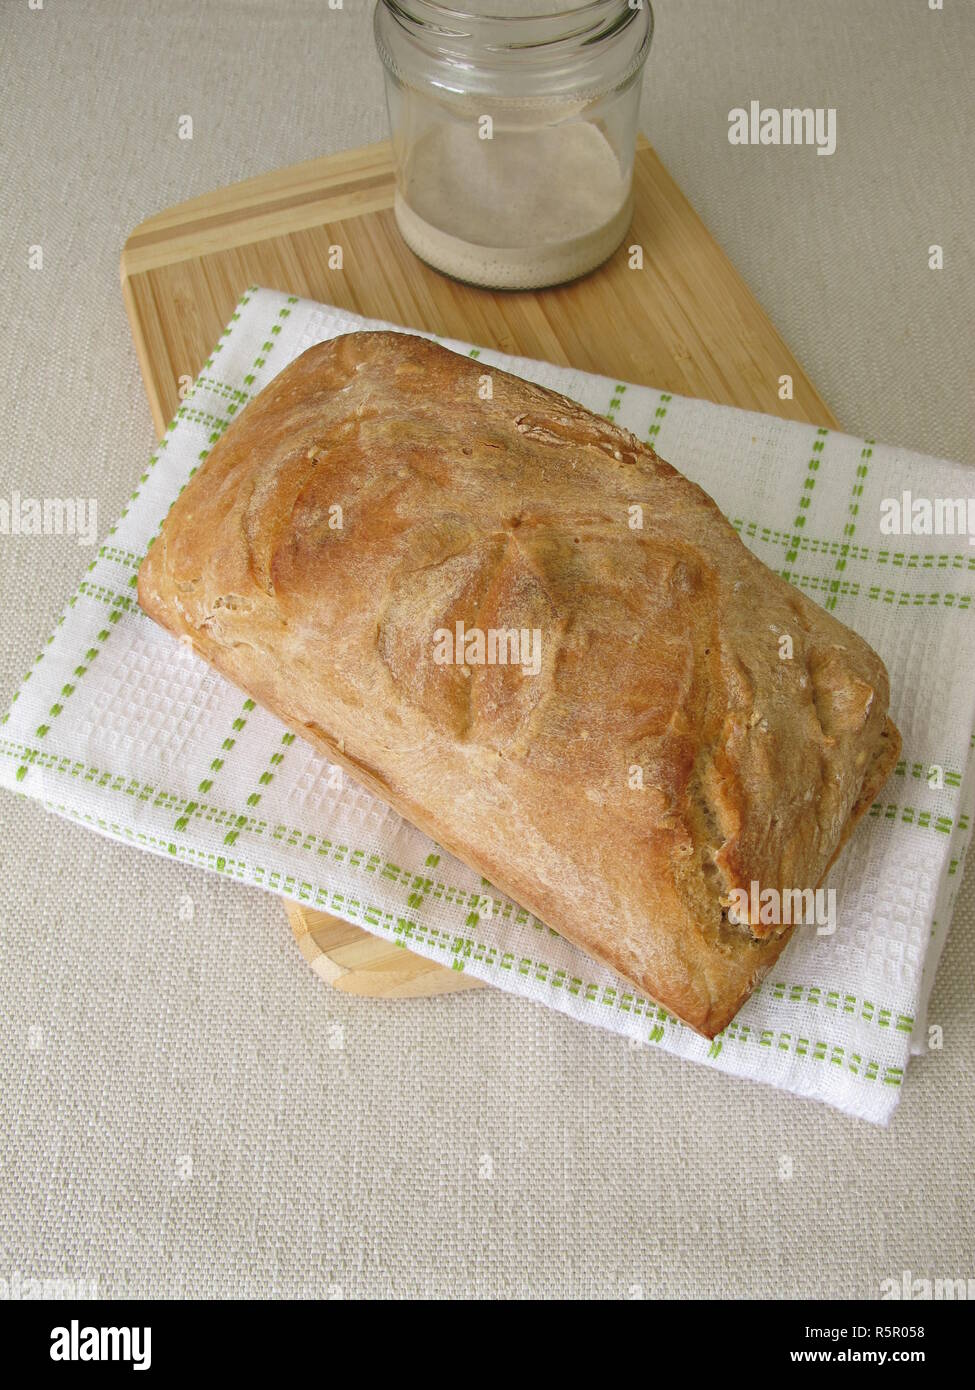 bread made from homemade leaven Stock Photo